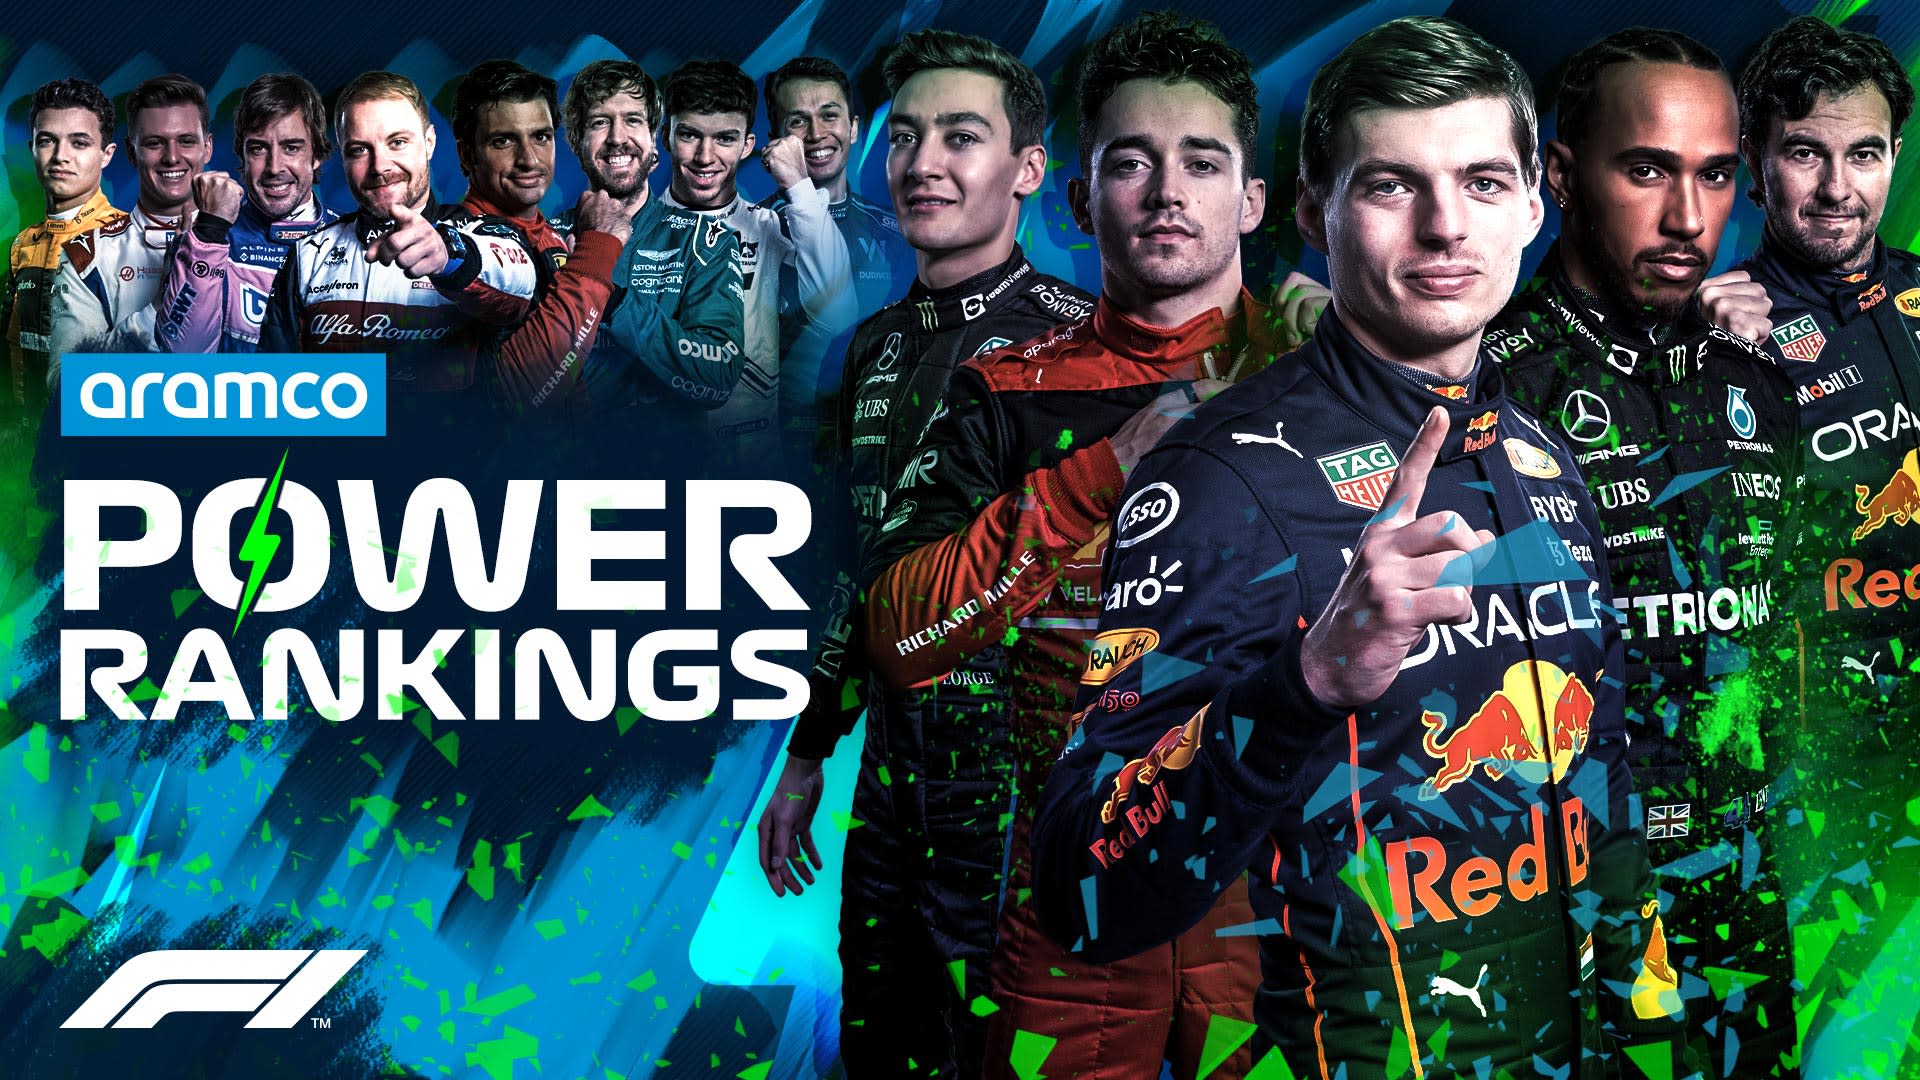 POWER RANKINGS: No perfect 10s in Spain – but who's on top after Barcelona? - Formula 1